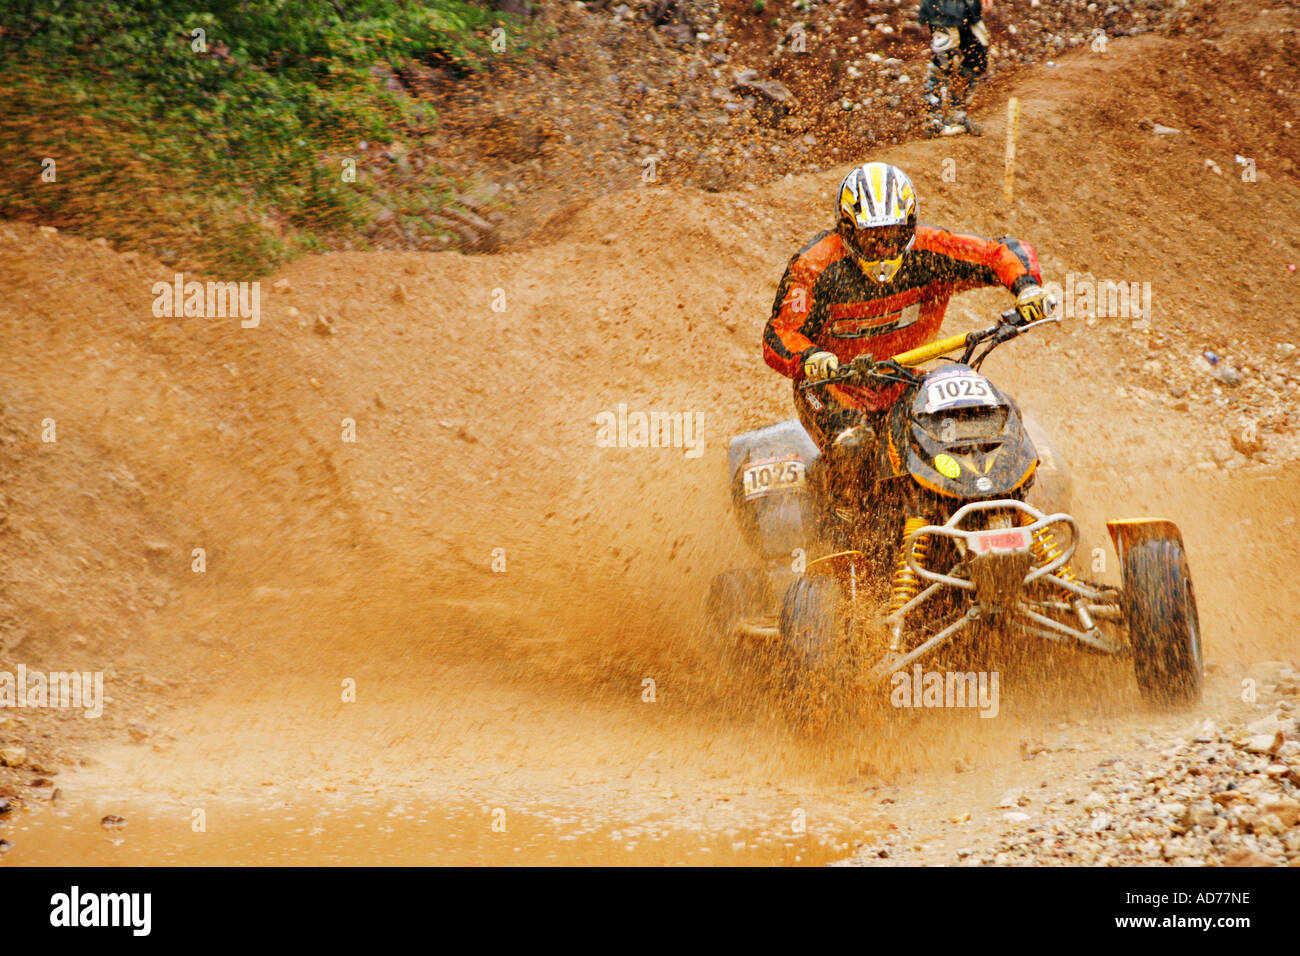 Quad driver in the dirt Stock Photo